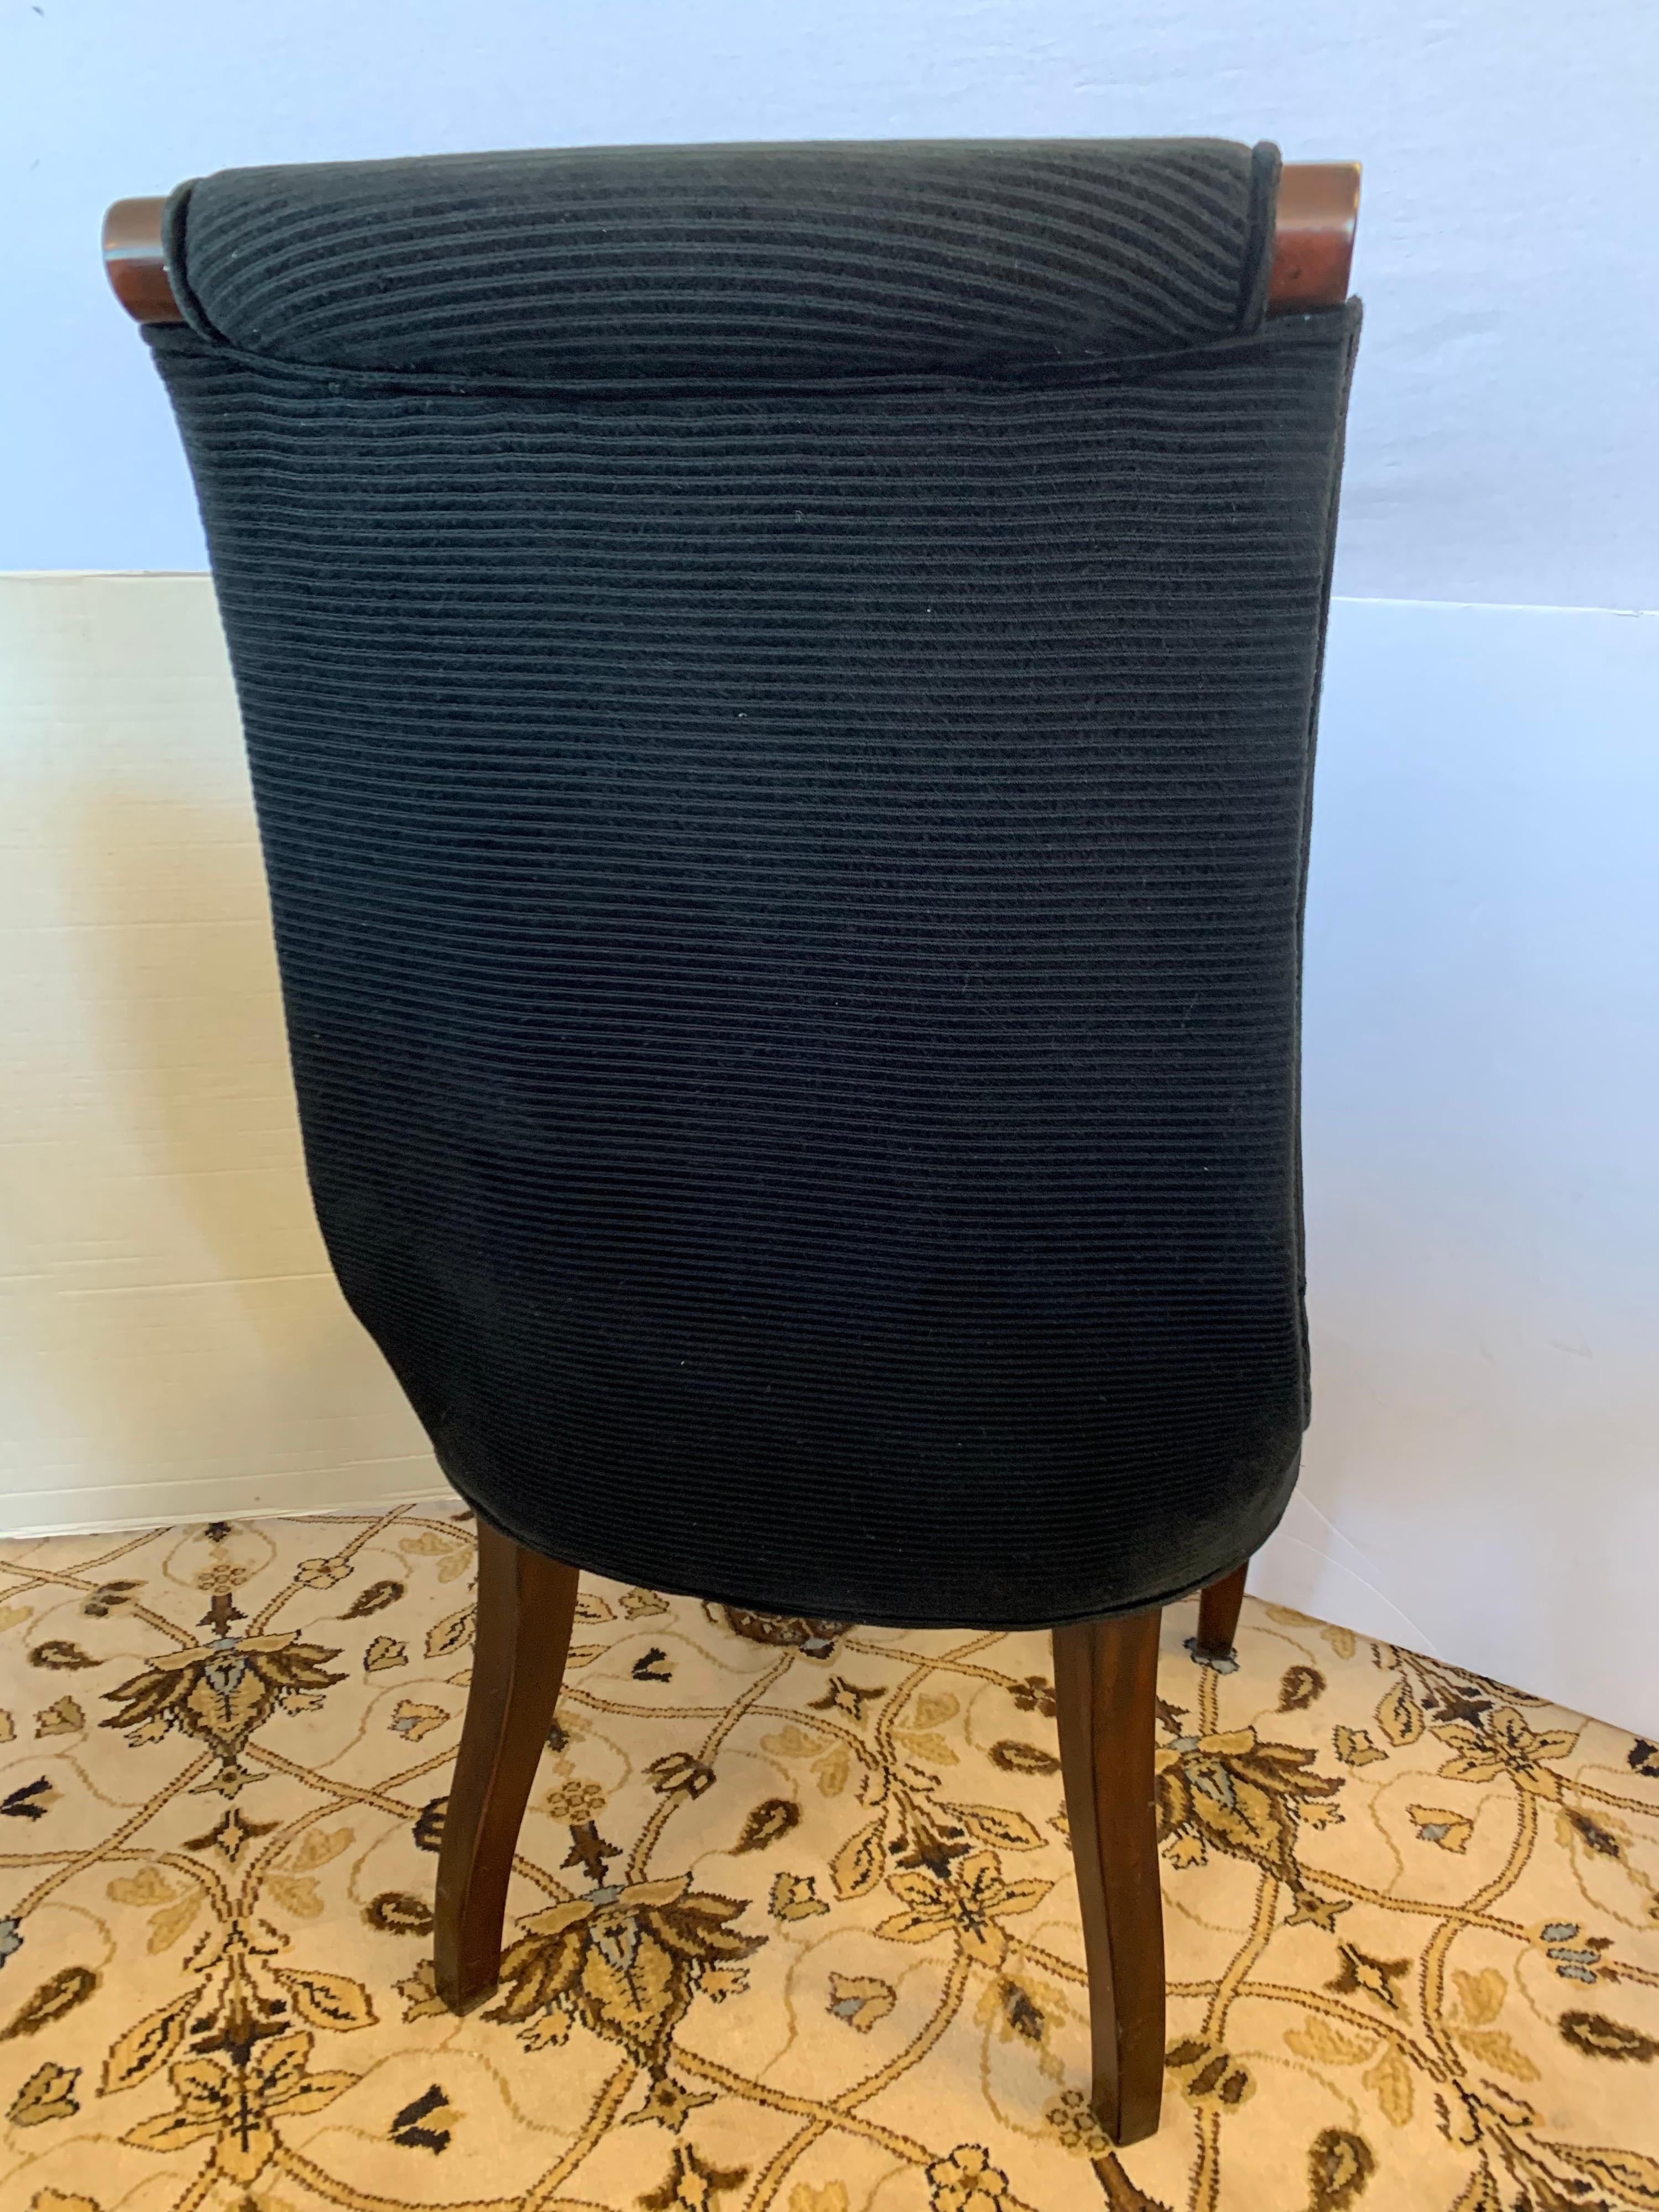 Magnificent set of four Henredon dining chairs done in mahogany wood and a luxurious
black velvet fabric that has subtle pinstripes running horizontally. All vendor hallmarks are at bottom
and these chairs originally retailed at 1895.00 per chair.